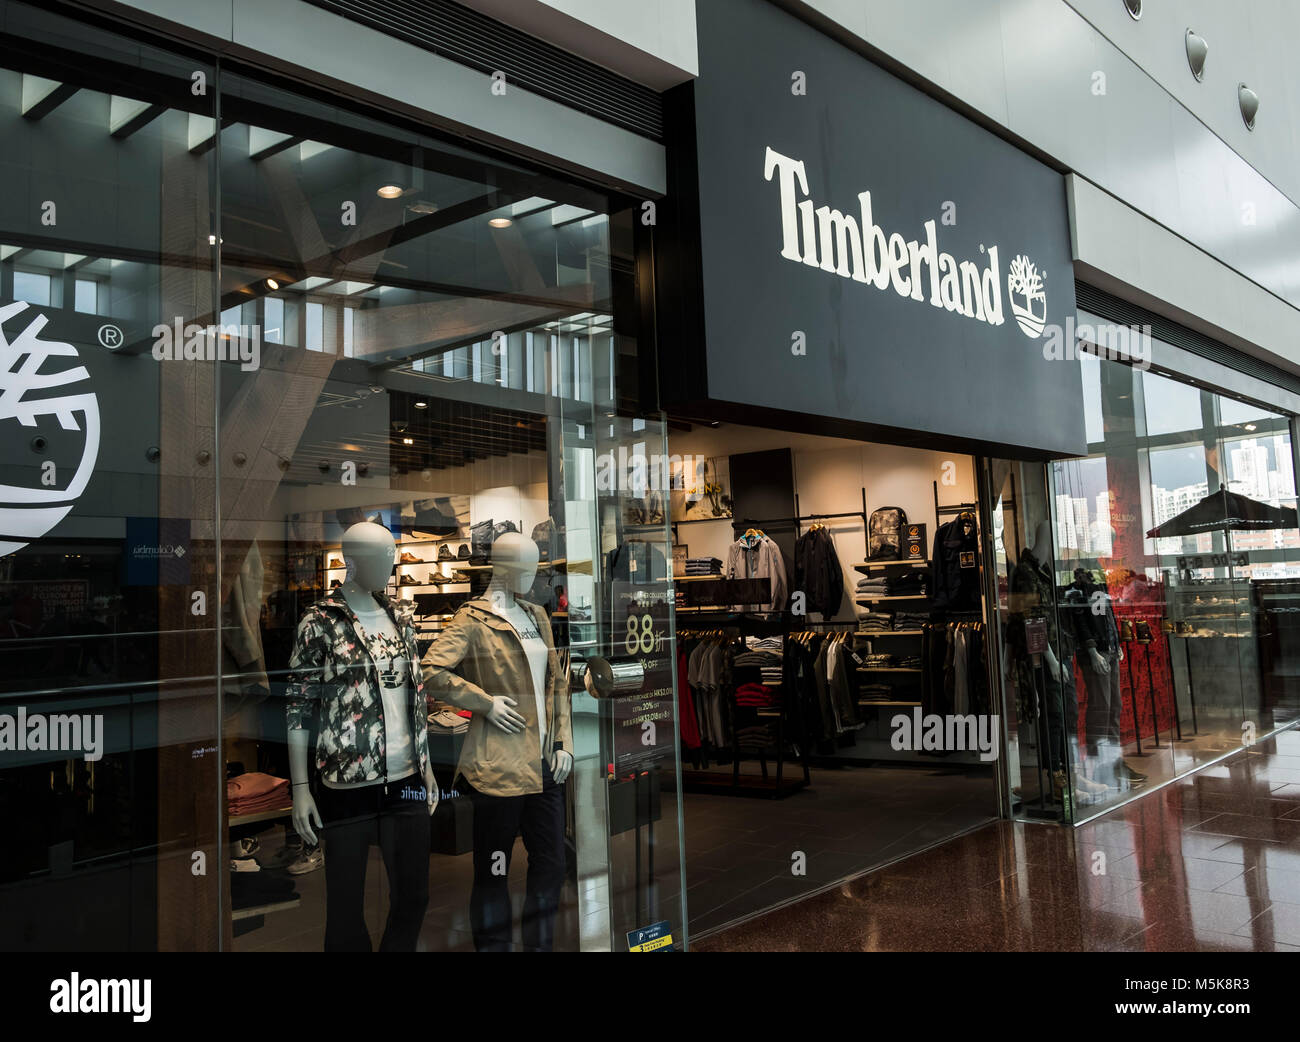 Timberland Shop High Resolution Stock Photography and Images - Alamy